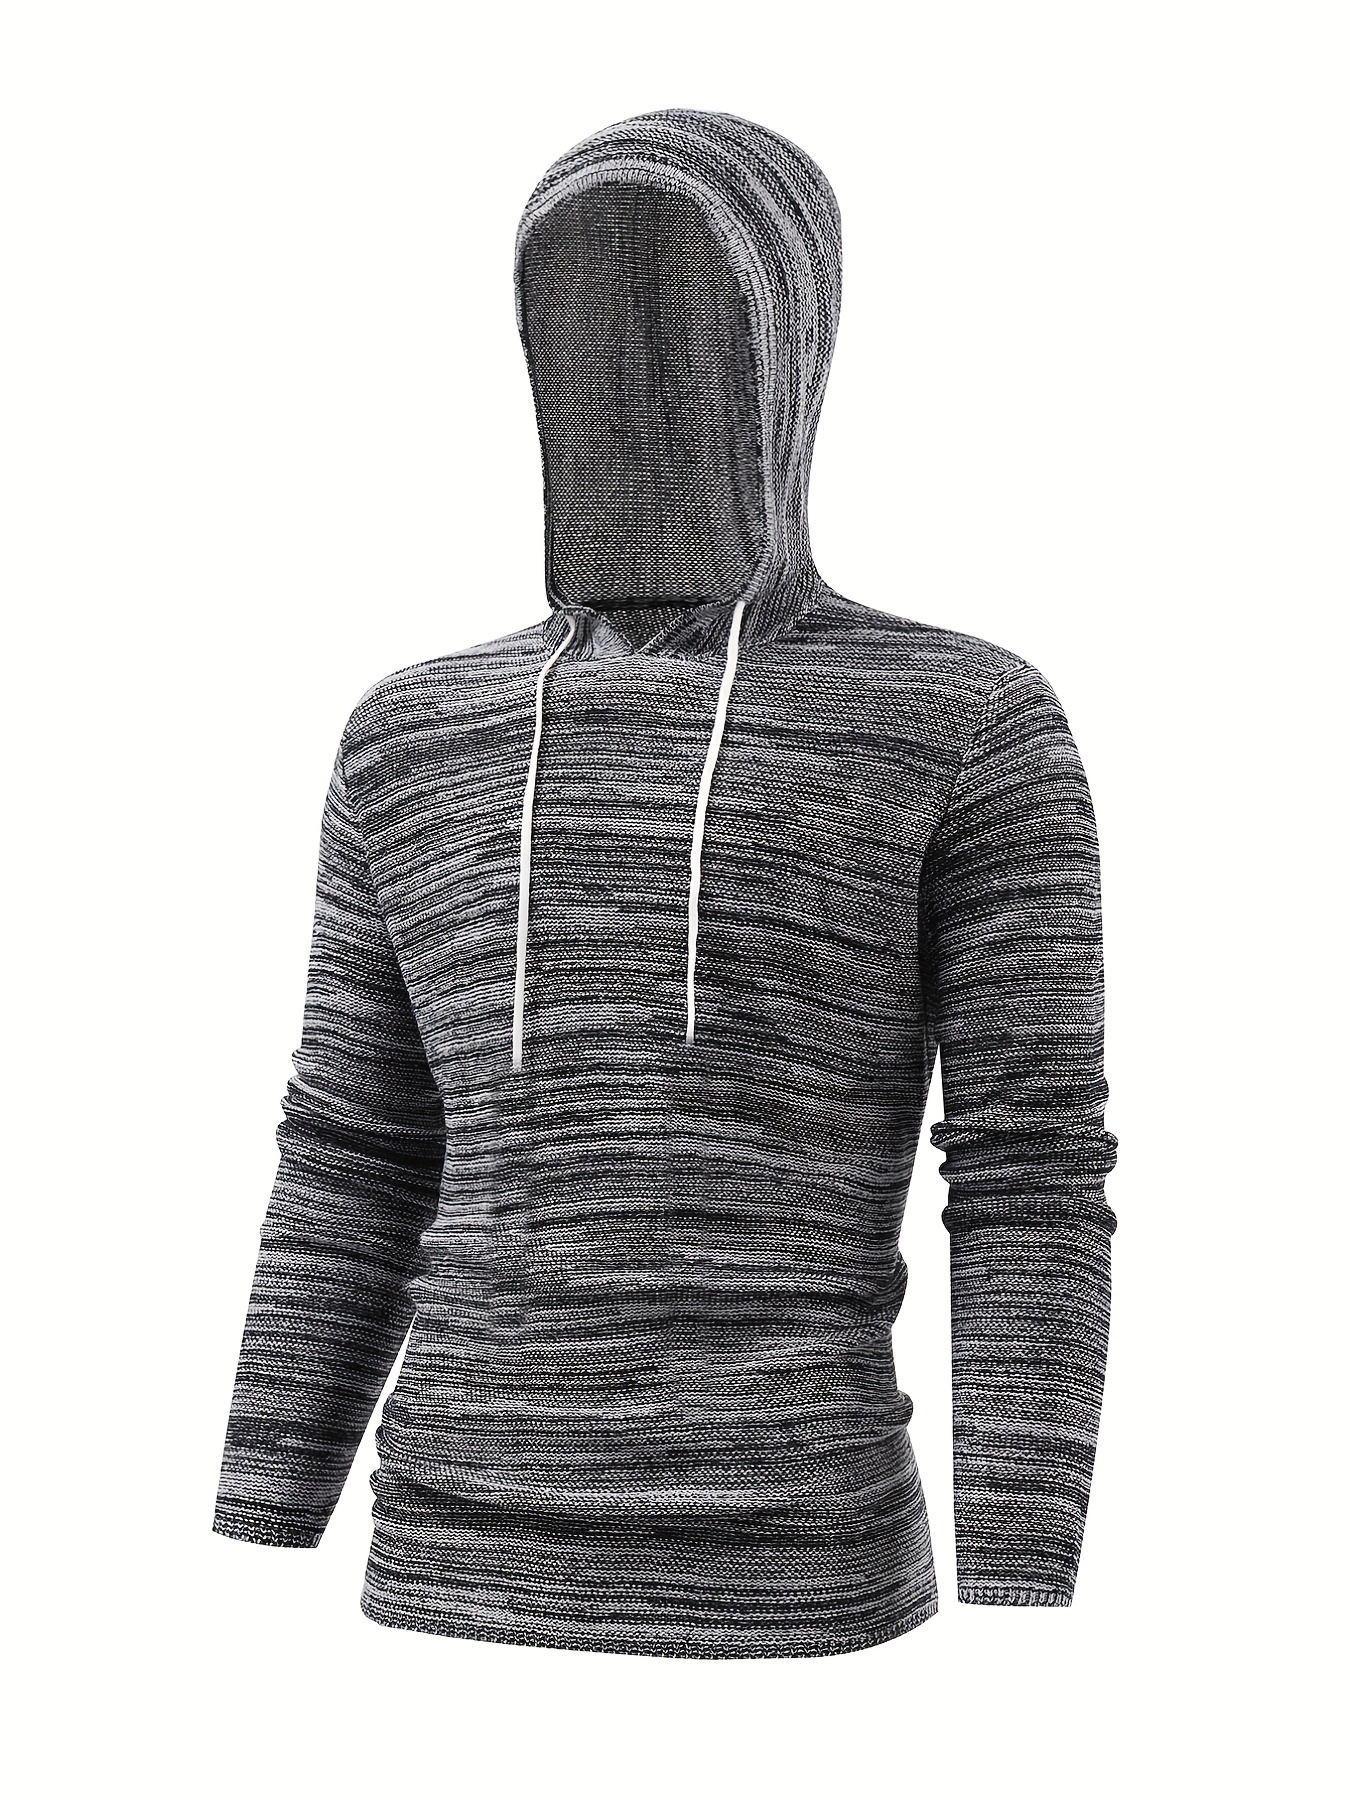 Cool Knitted Hoodies For Men, Men's Casual Pullover Hooded Sweatshirt With  Kangaroo Pocket Streetwear For Winter Fall, As Gifts